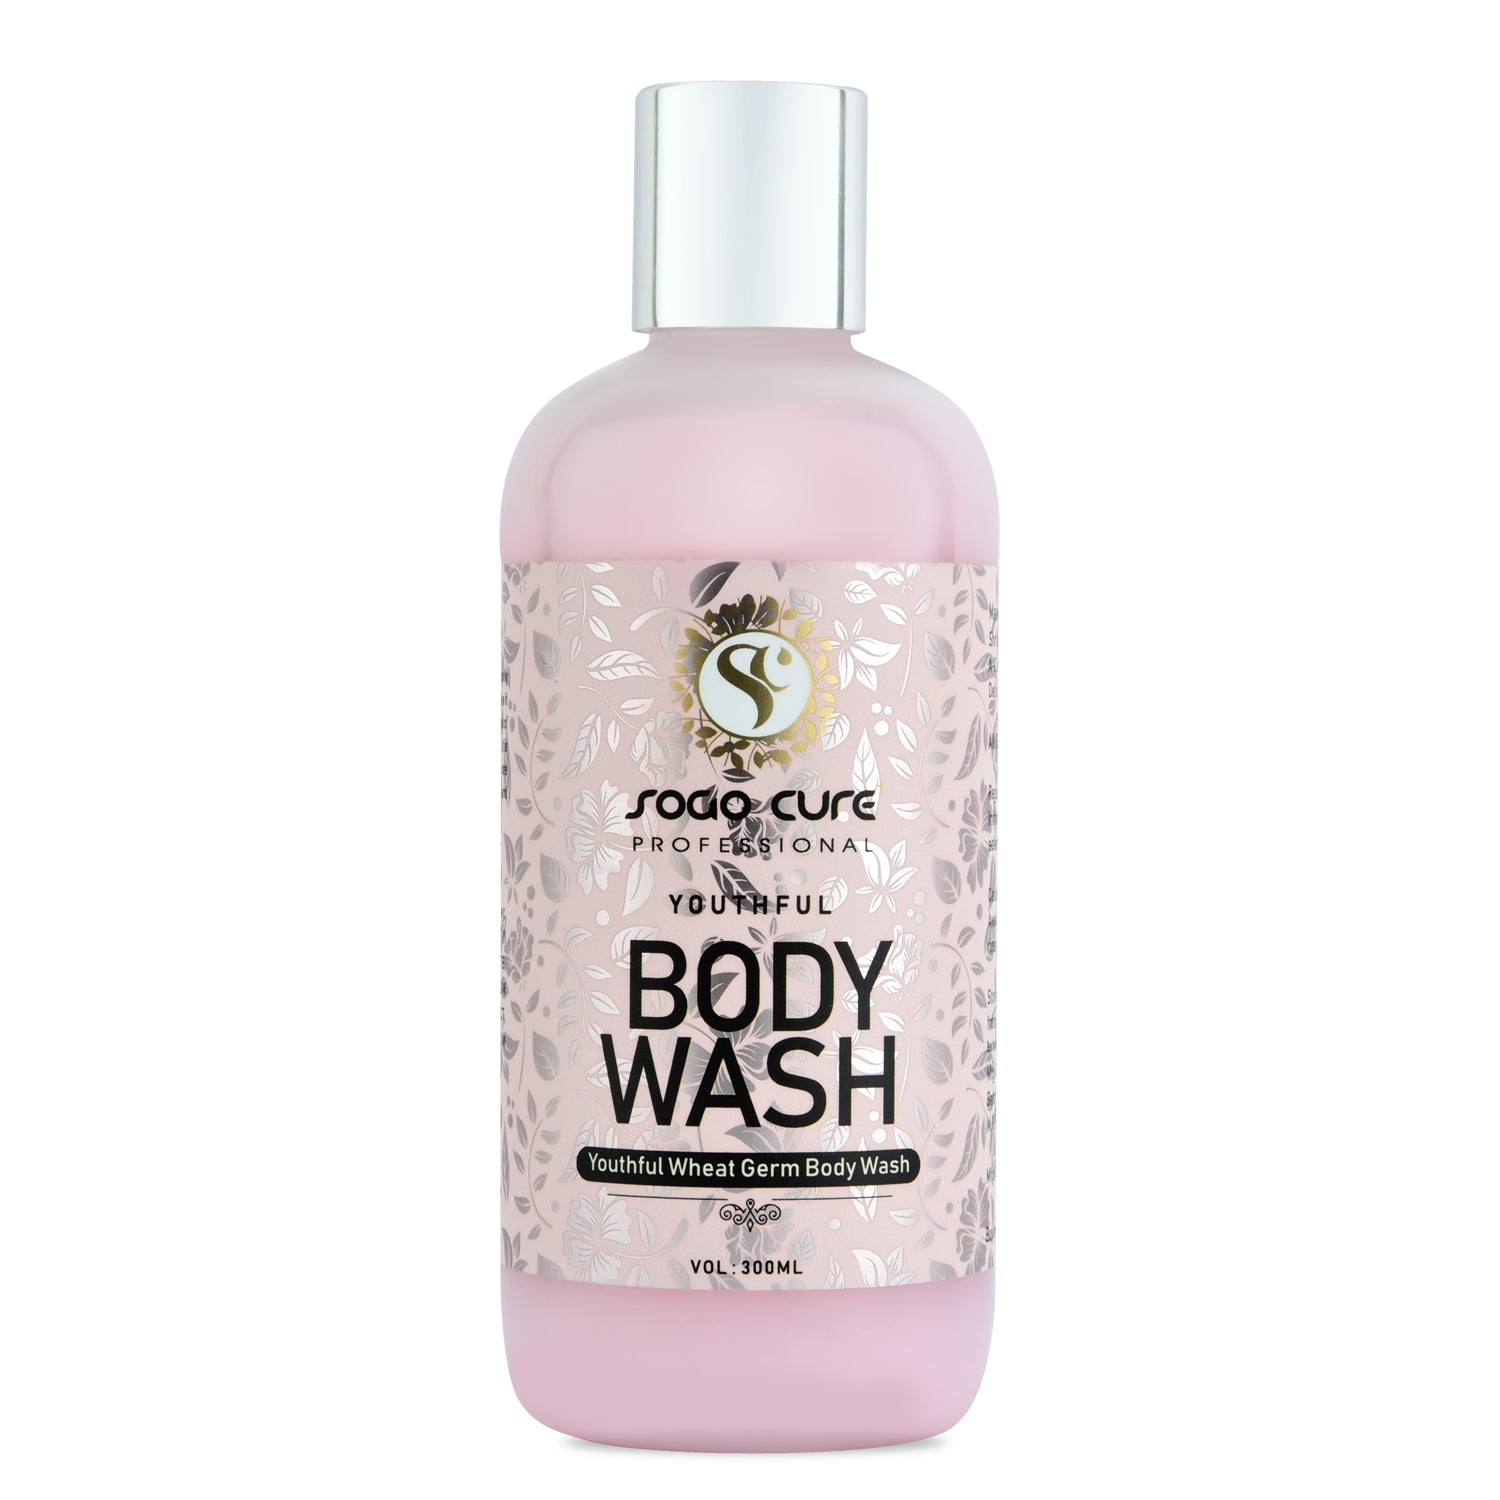 Body Wash Single Pump Bottle Essential Oil & Lemon Extracts for a Soft and Smooth Skin, pH Balanced Free of Parabens & Silicones Body Wash